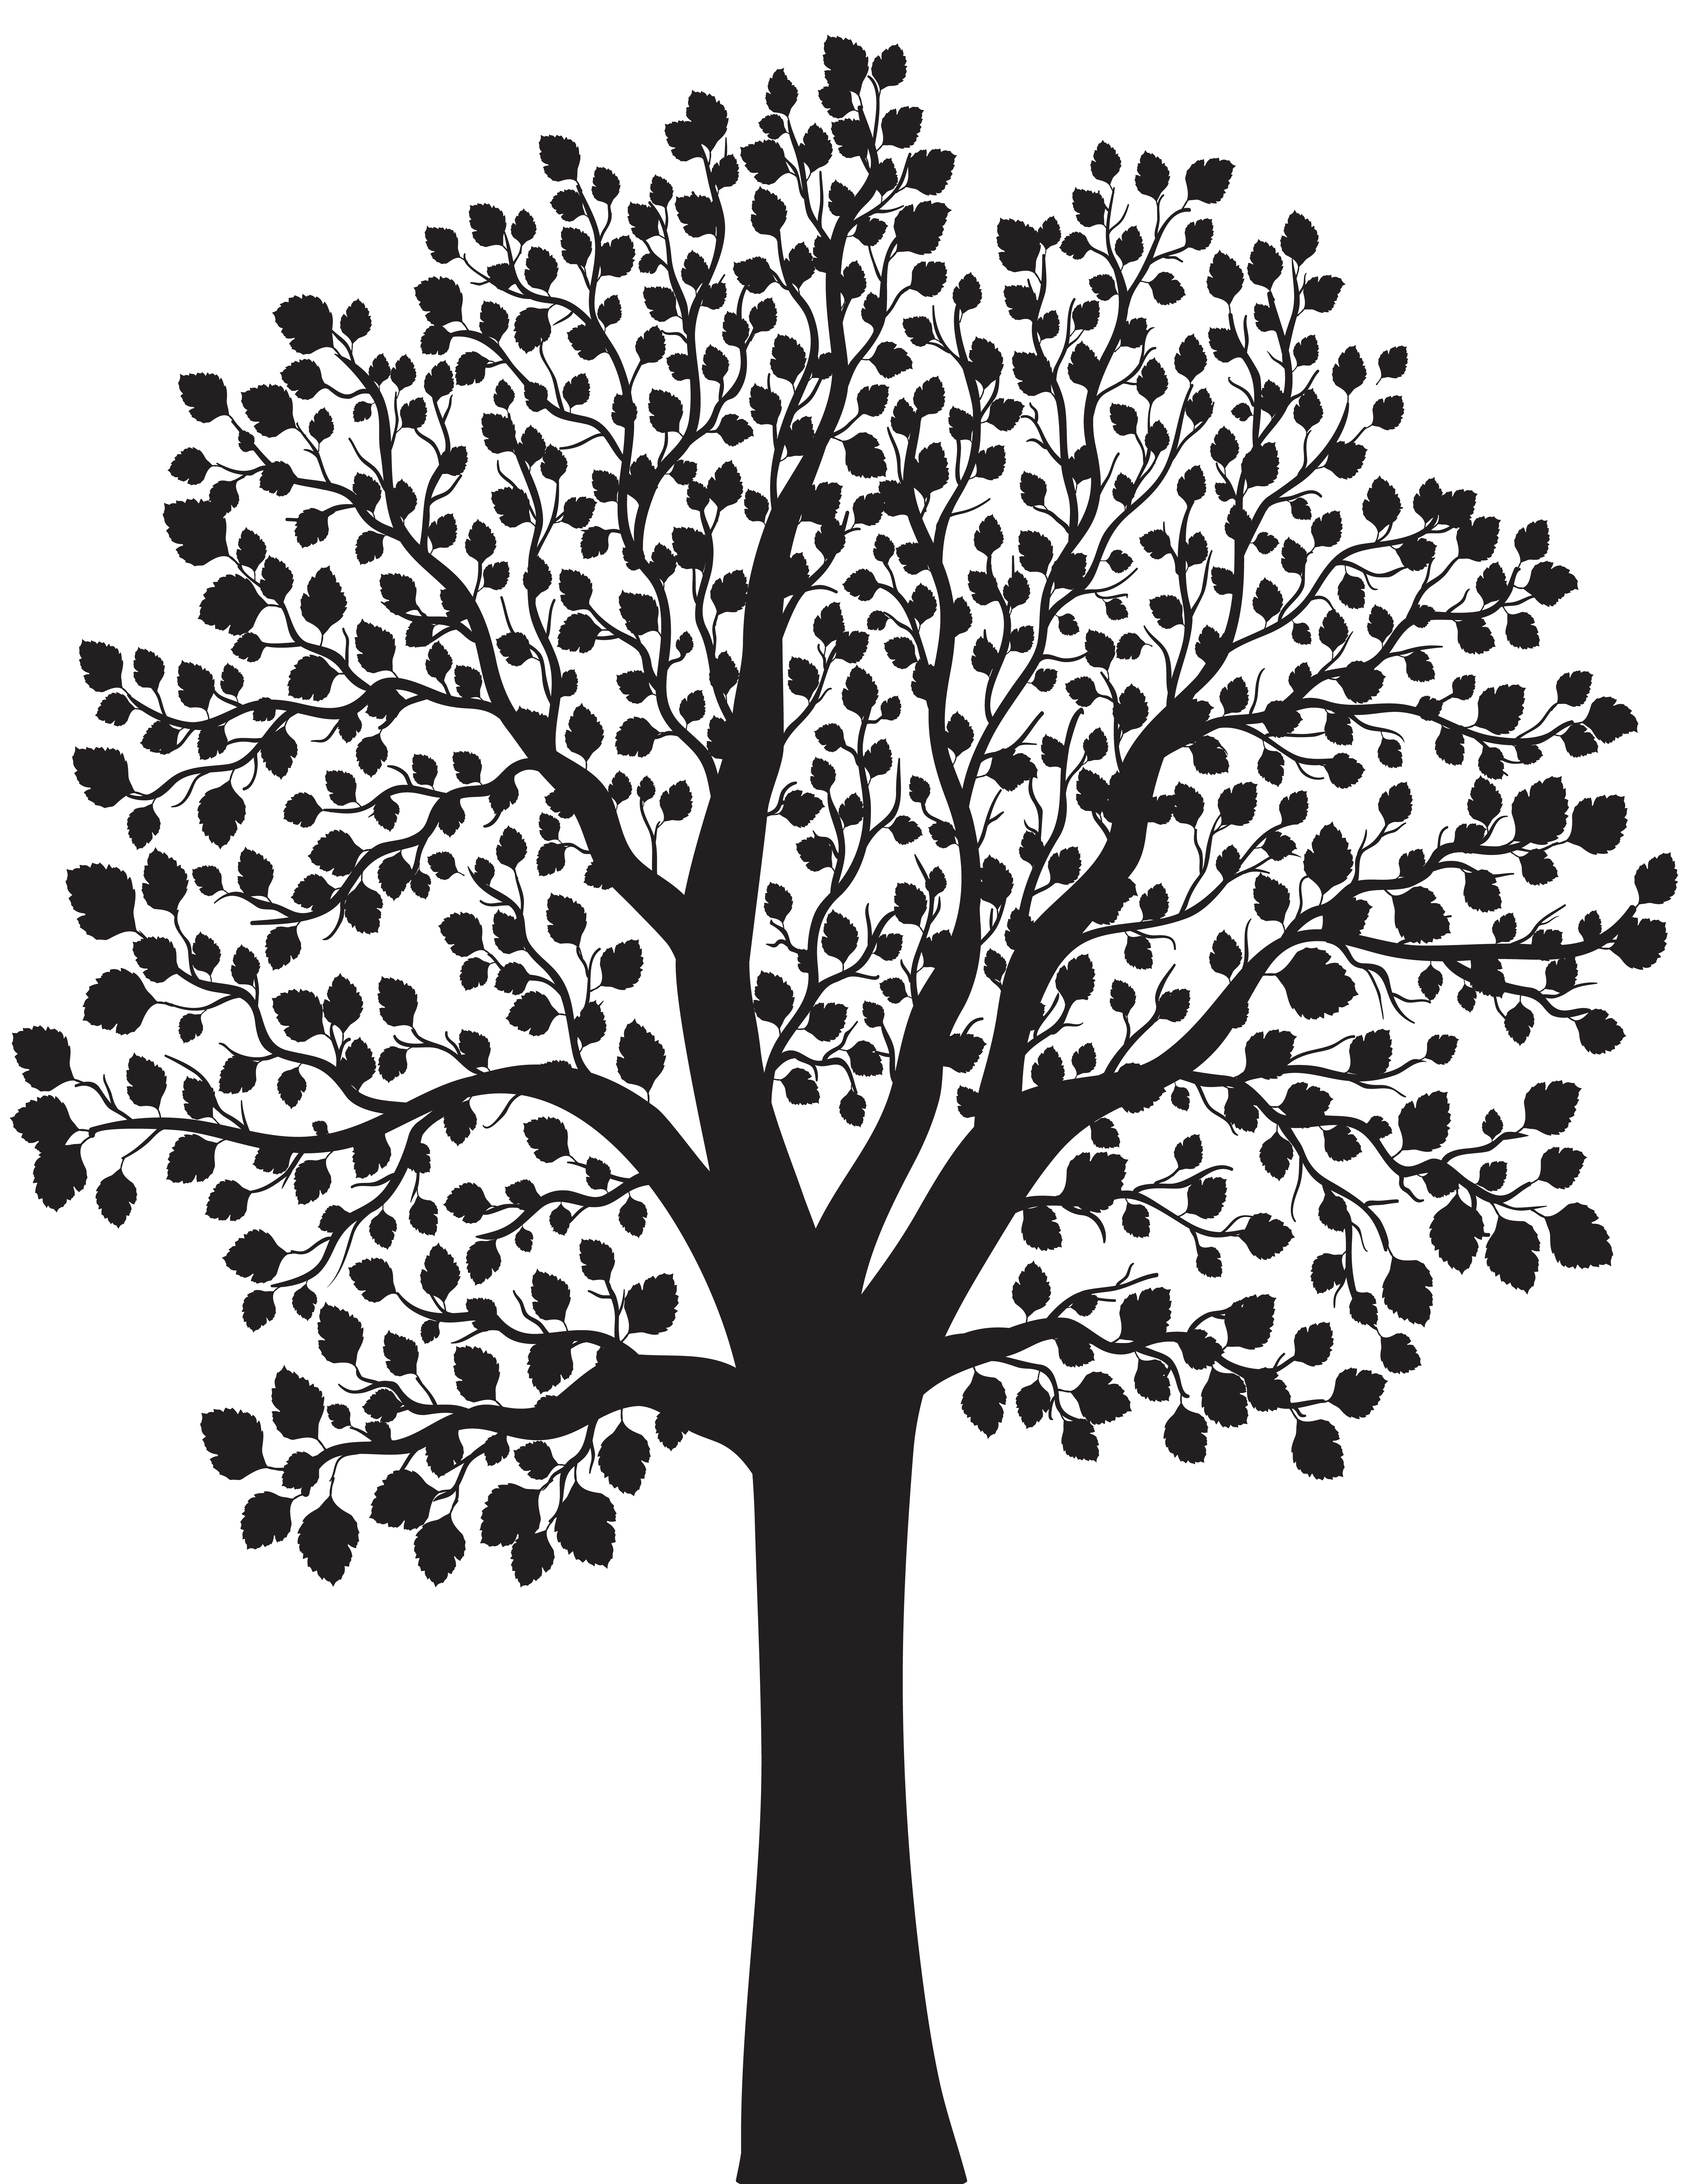 Tree Silhouette PNG Clip Art Image.